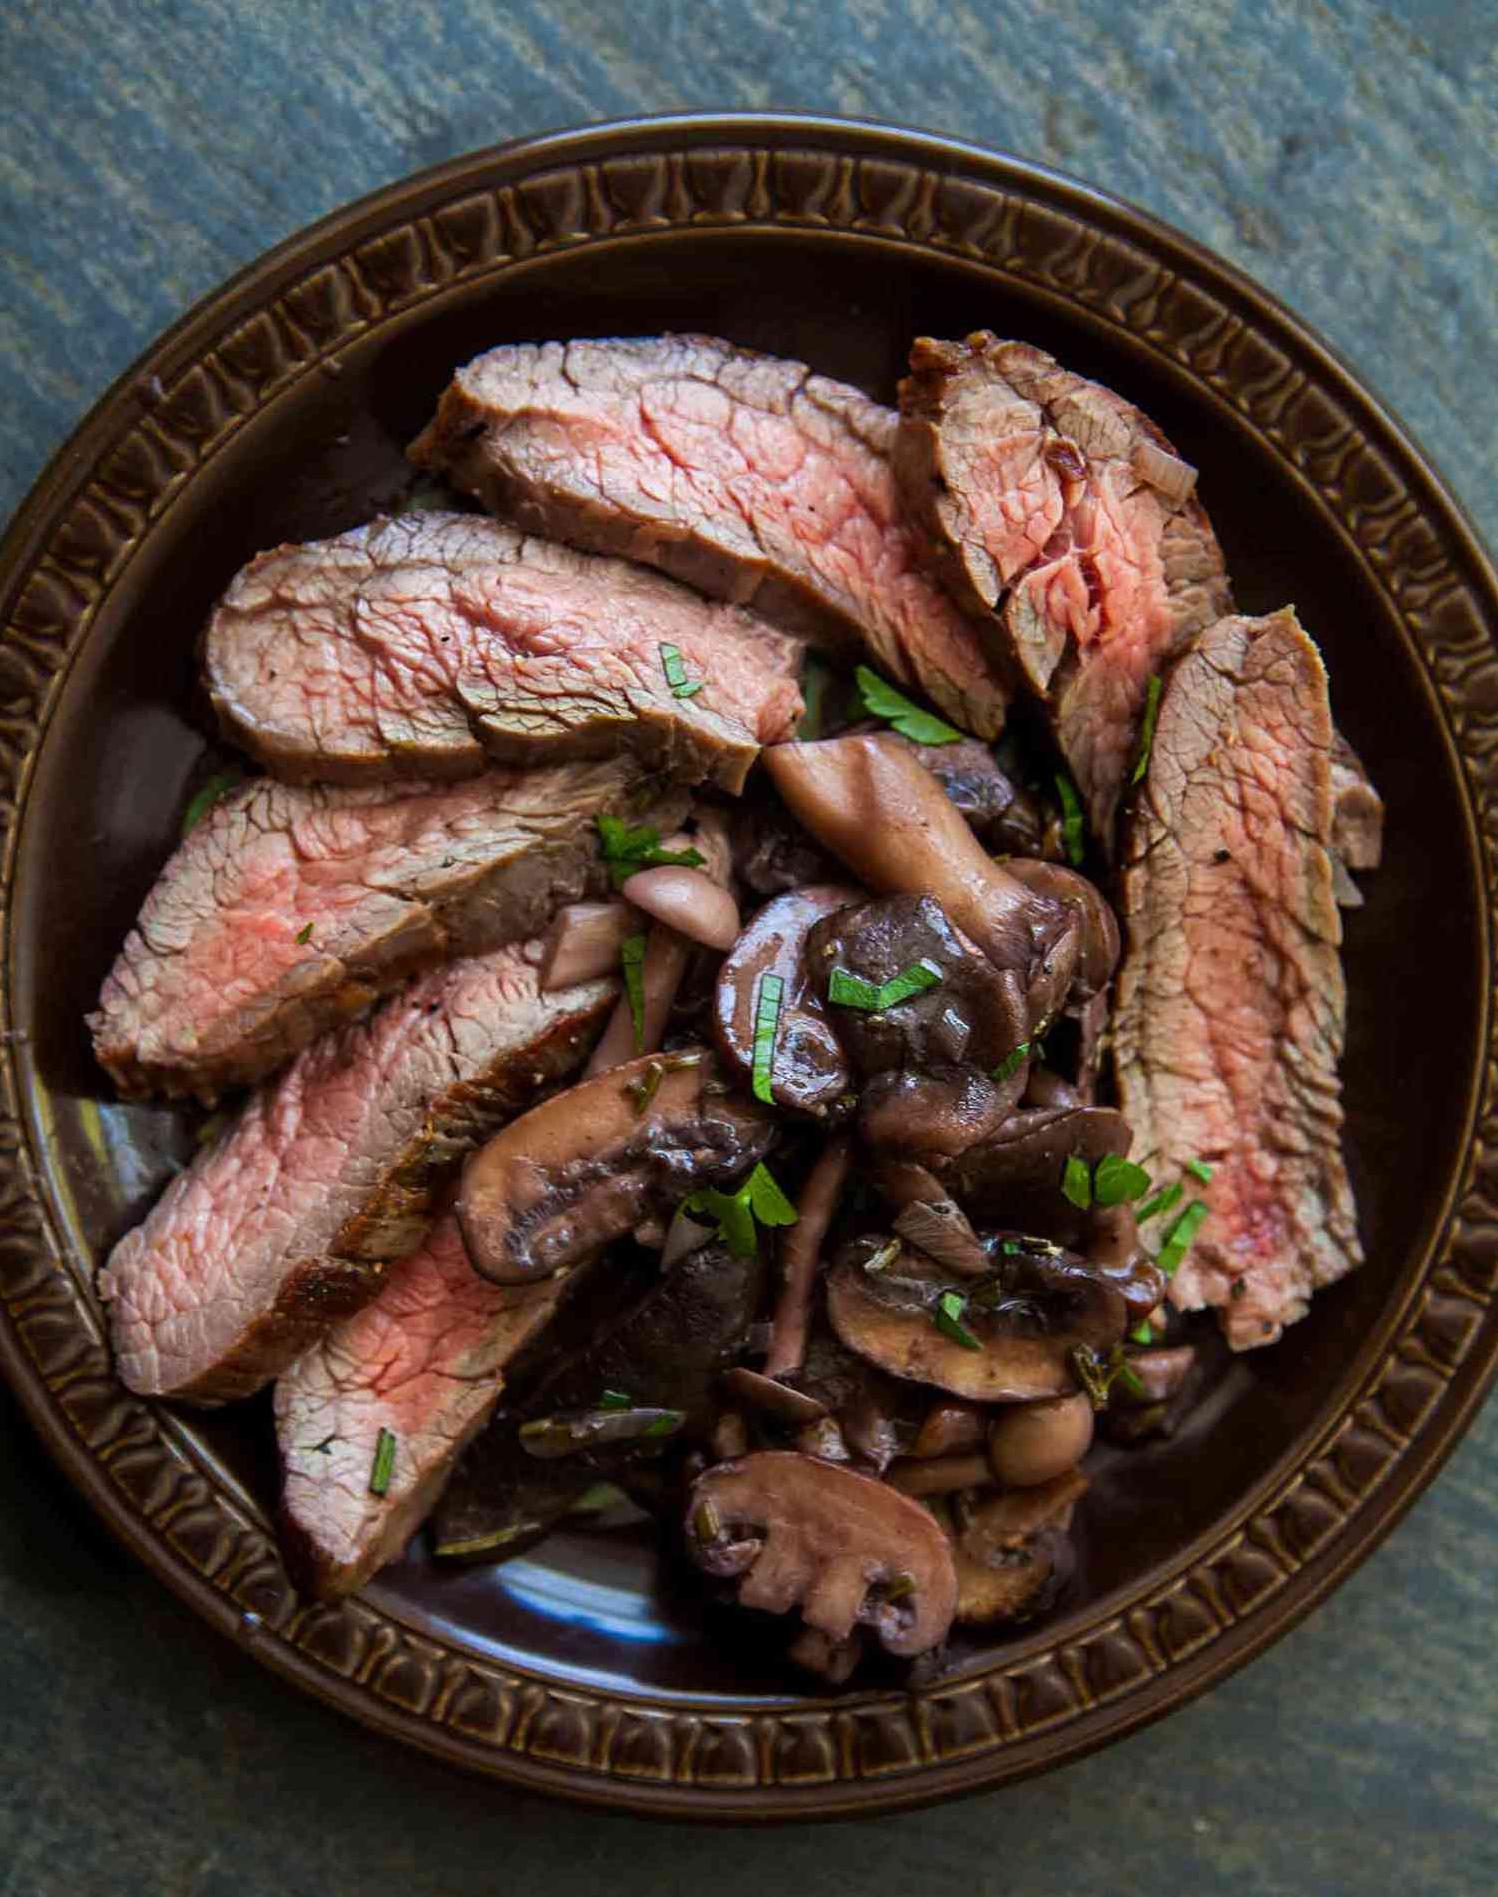  A drizzle of rich mushroom wine sauce takes this dish to the next level.